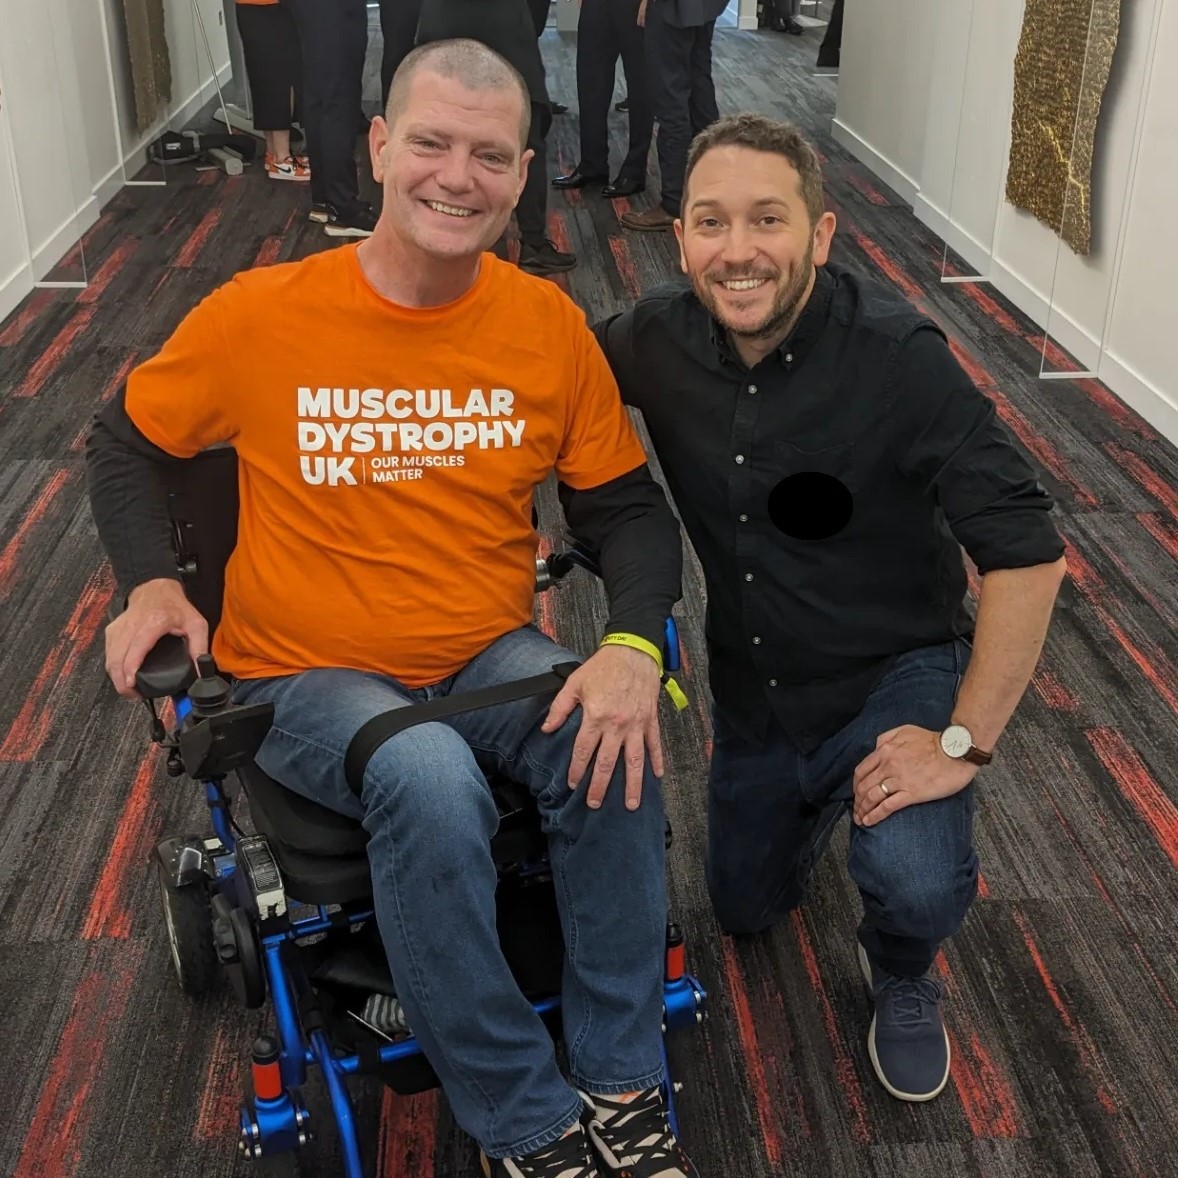 📣 We're excited to announce Jon Richardson and Friends is returning to Aylesbury for a comedy night in support of our work! Inspired by his friend Martin, who lives with muscular dystrophy, Jon promises an unforgettable show. Get your ticket now: shorturl.at/cfhp6